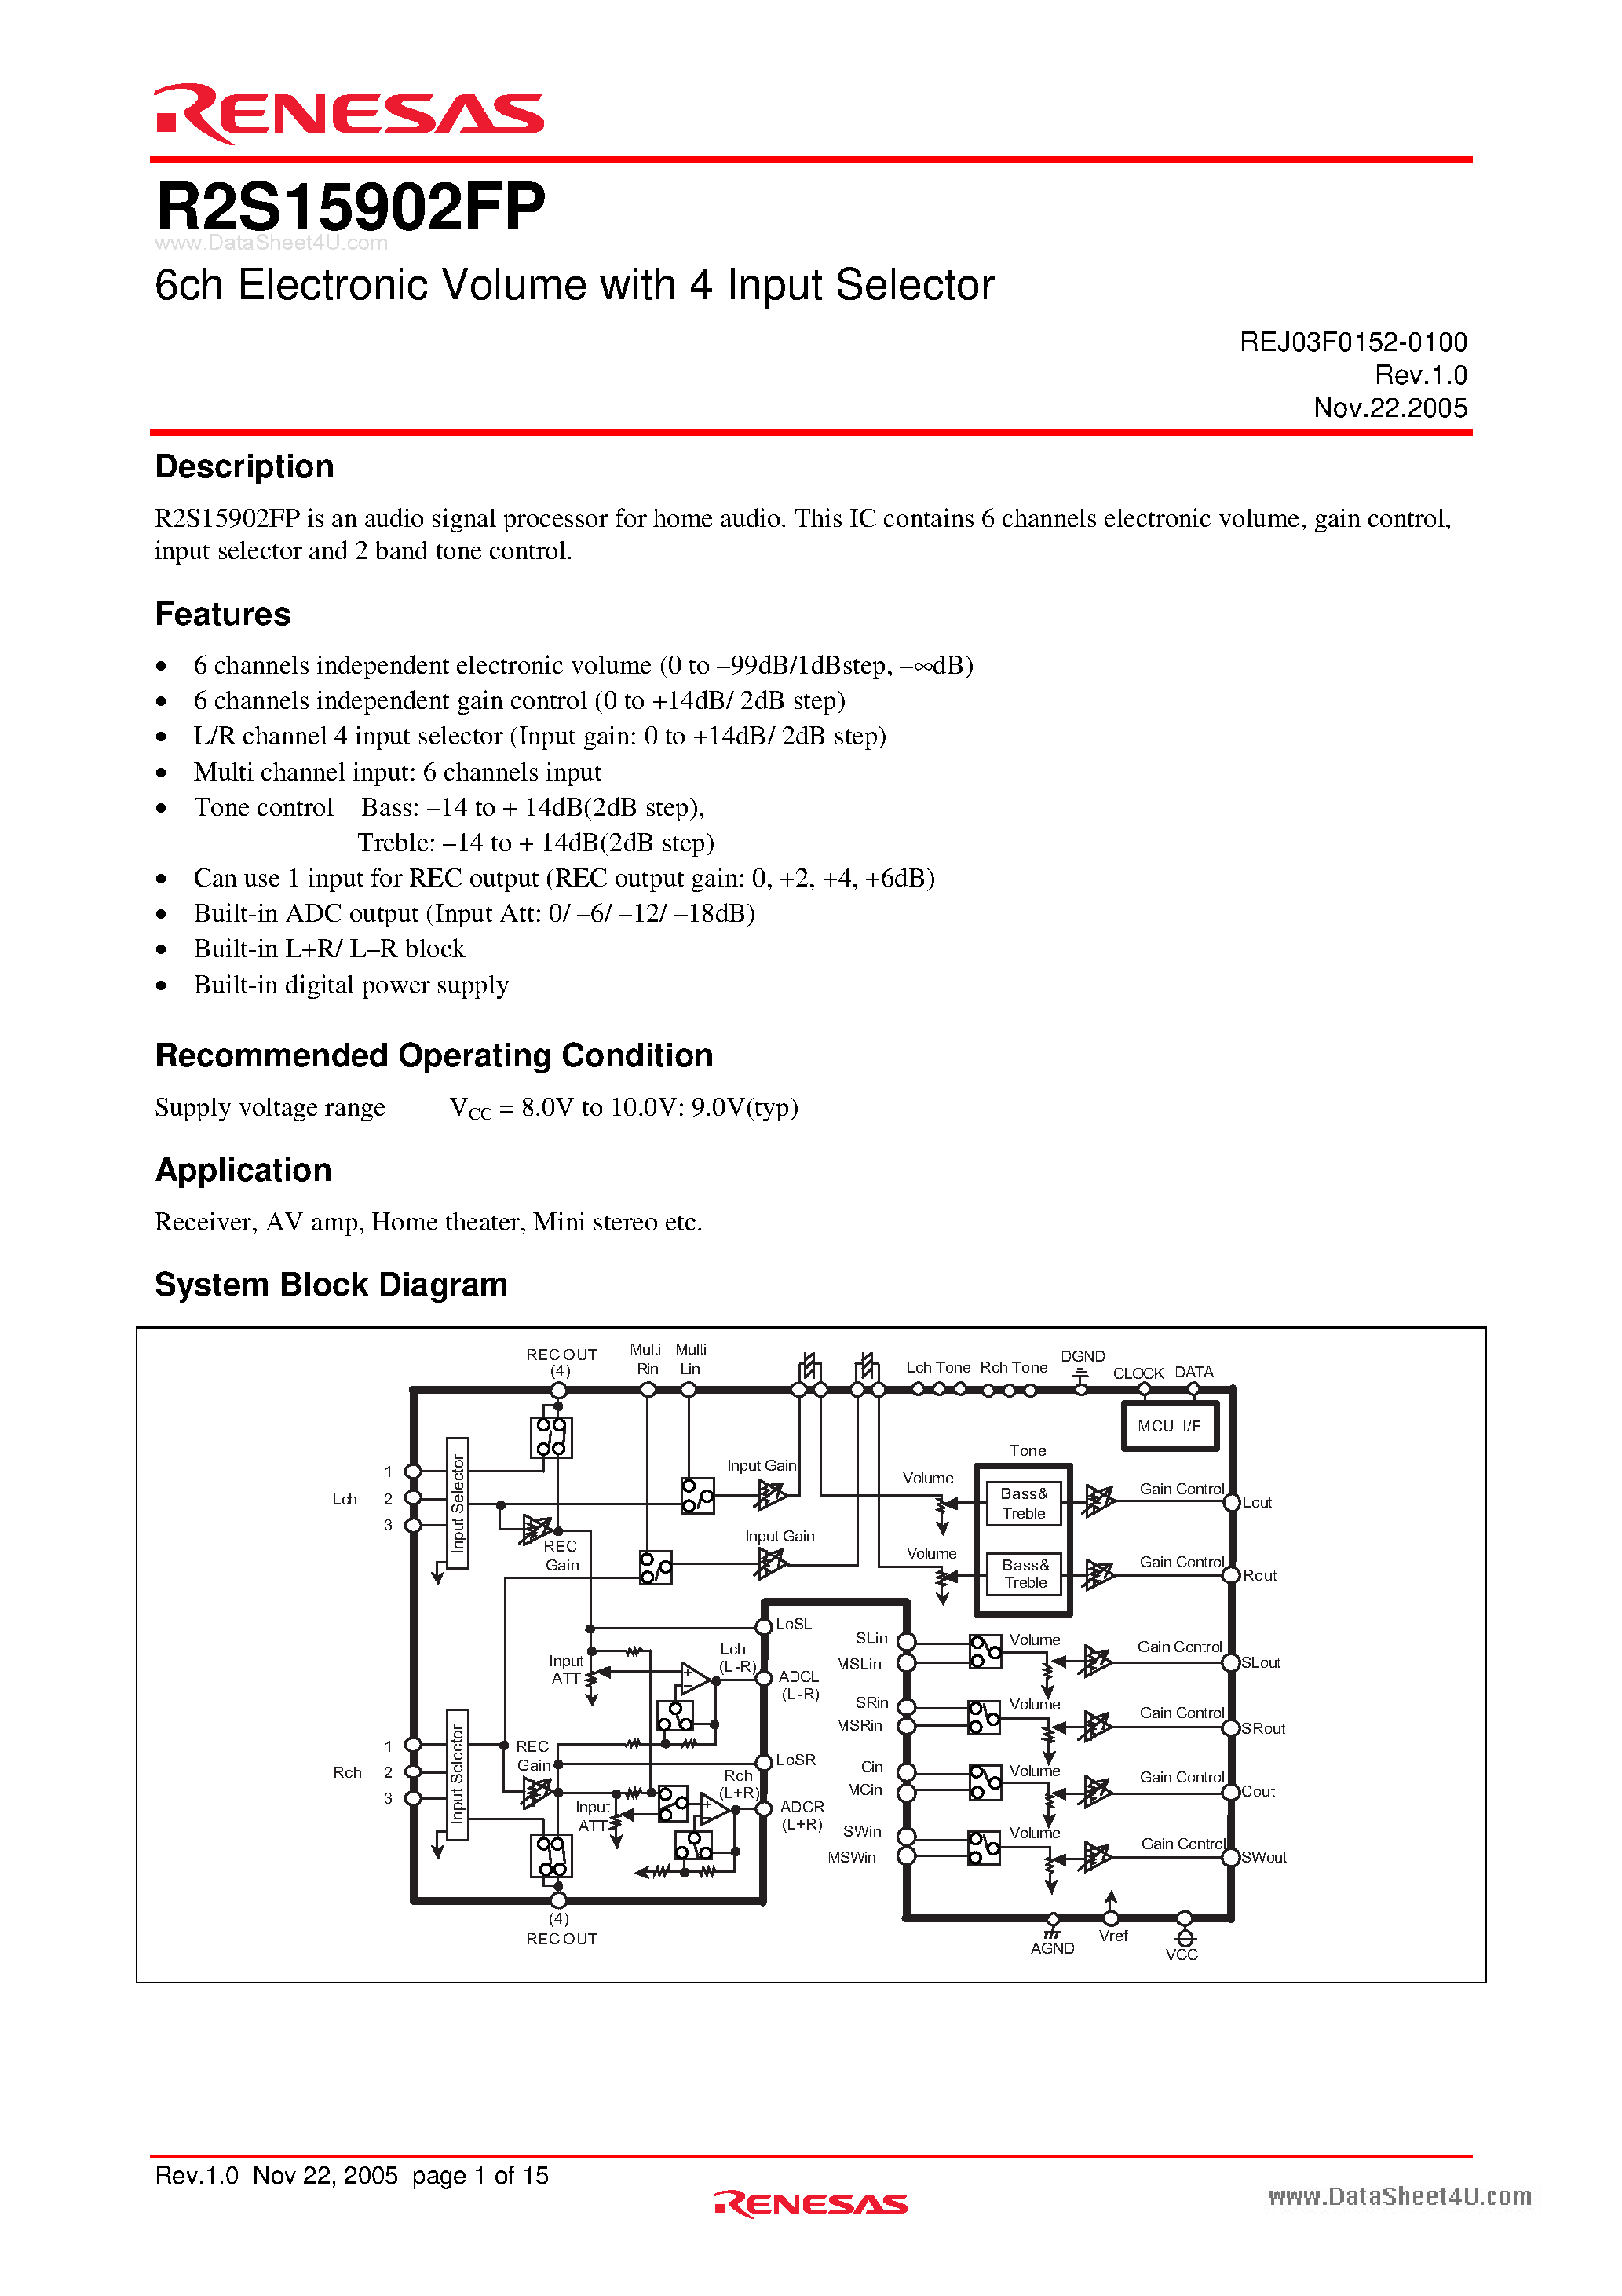 Datasheet 2S15902FP - 6ch Electronic Volume page 1